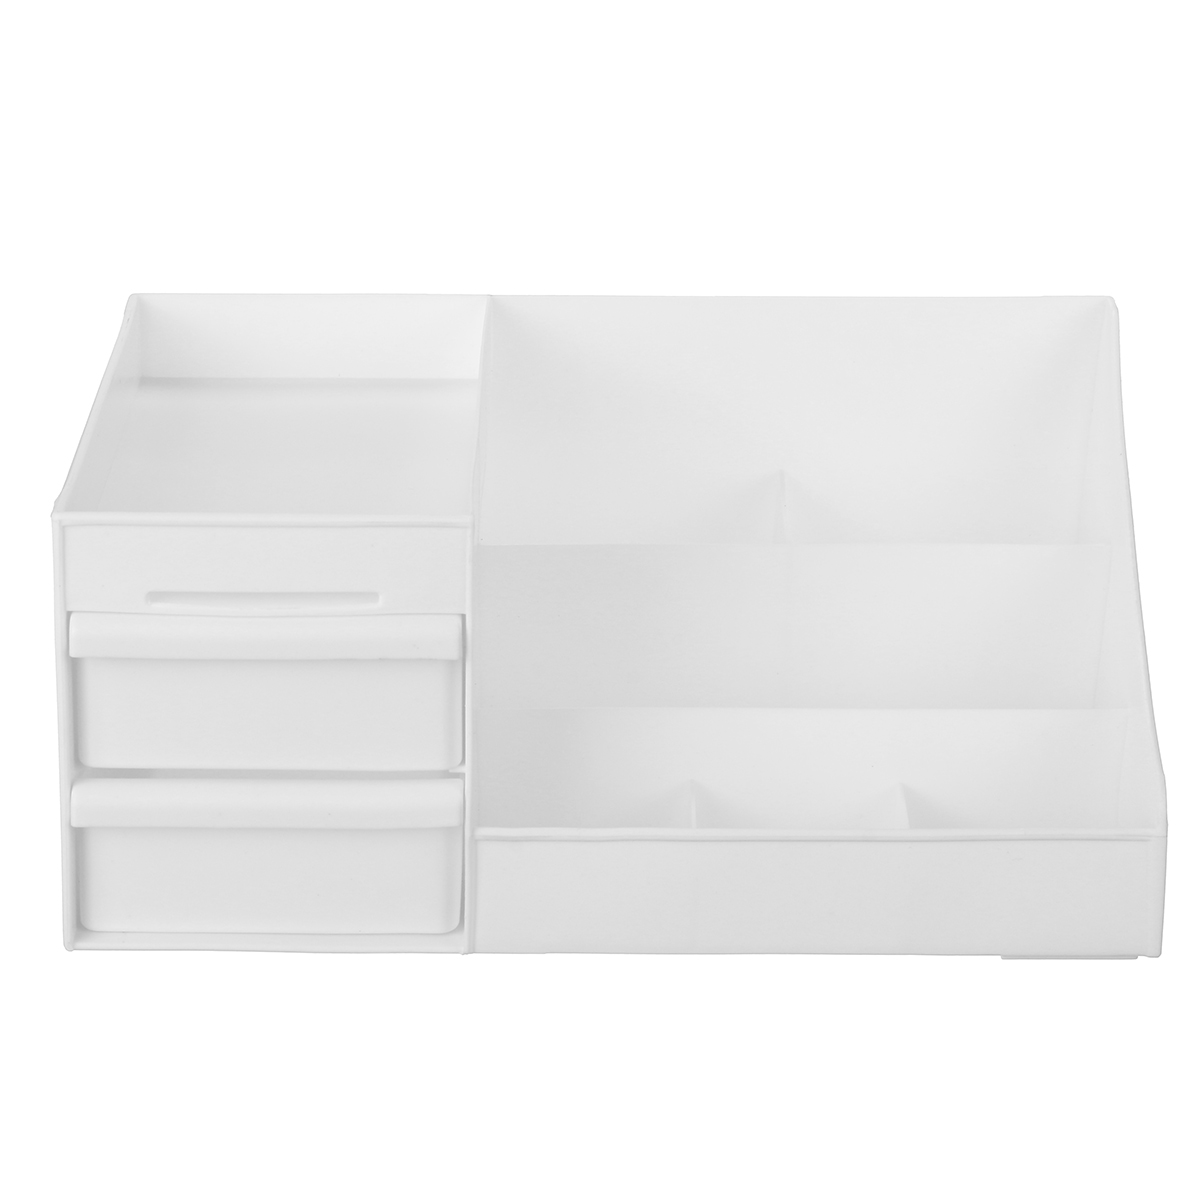 Plastic-Cosmetic-Makeup-Storage-Box-Organizer-Case-Holder-Jewelry-with-Drawer-1700918-5